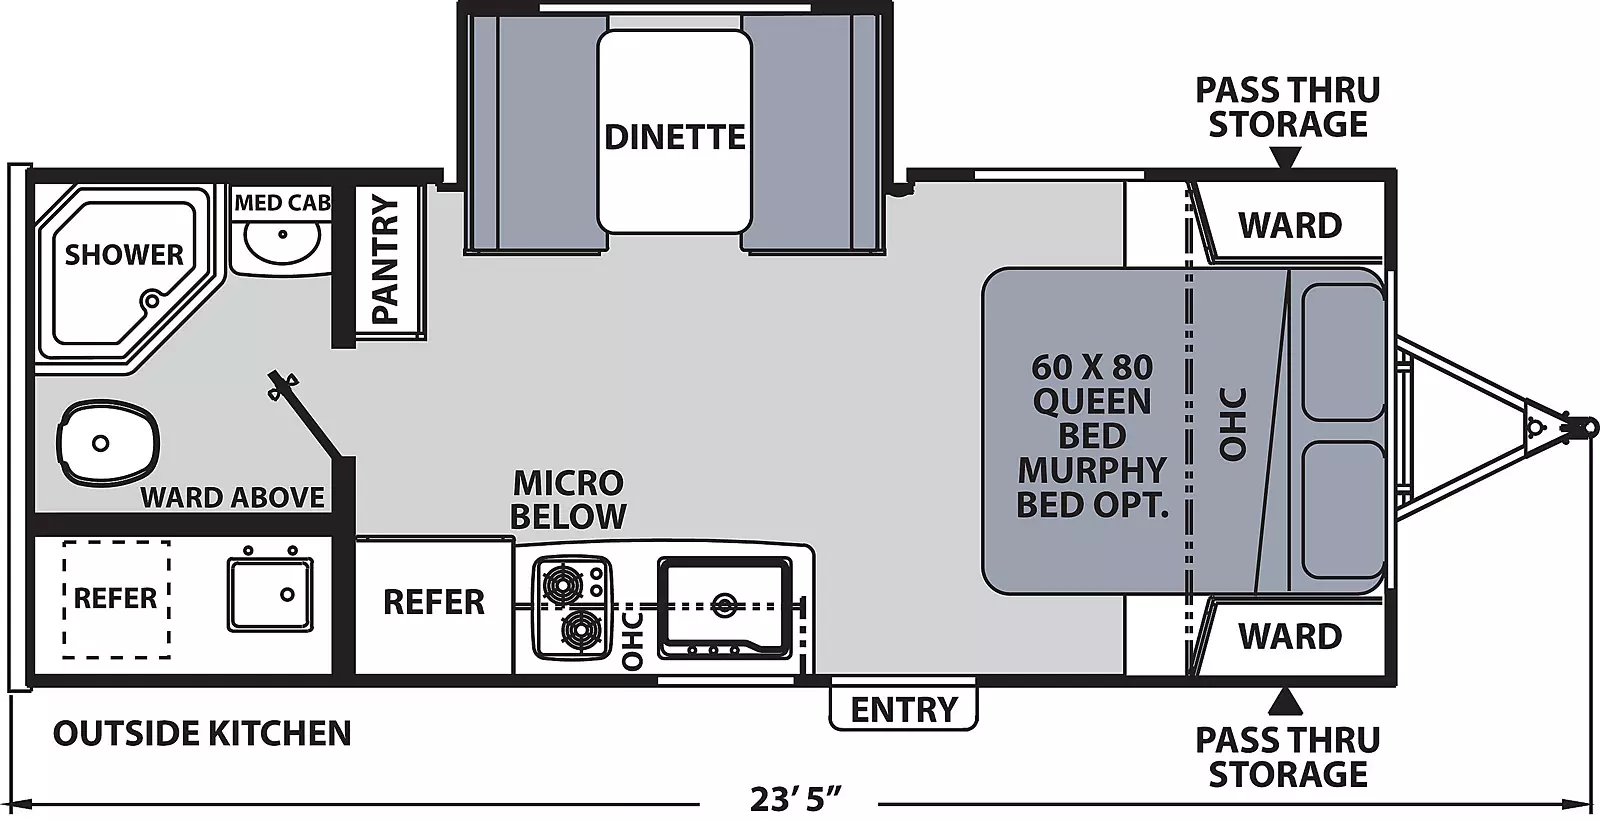 The 203RBK has one slide out on the off-door side and one entry door on the door side. Interior layout from front to back: front bedroom containing foot facing queen bed, overhead cabinet, and wardrobes on either side of bed (Murphy Bed optional). Kitchen living dining area with off- door side slide out containing dinette; door side kitchen containing sink, cook top stove, overhead cabinet, microwave below, and refrigerator; pantry located on the off-door side. Rear corner off-door side bathroom containing, wardrobe, toilet, shower, medicine cabinet. Exterior camp kitchen includes; mini refrigerator and sink.